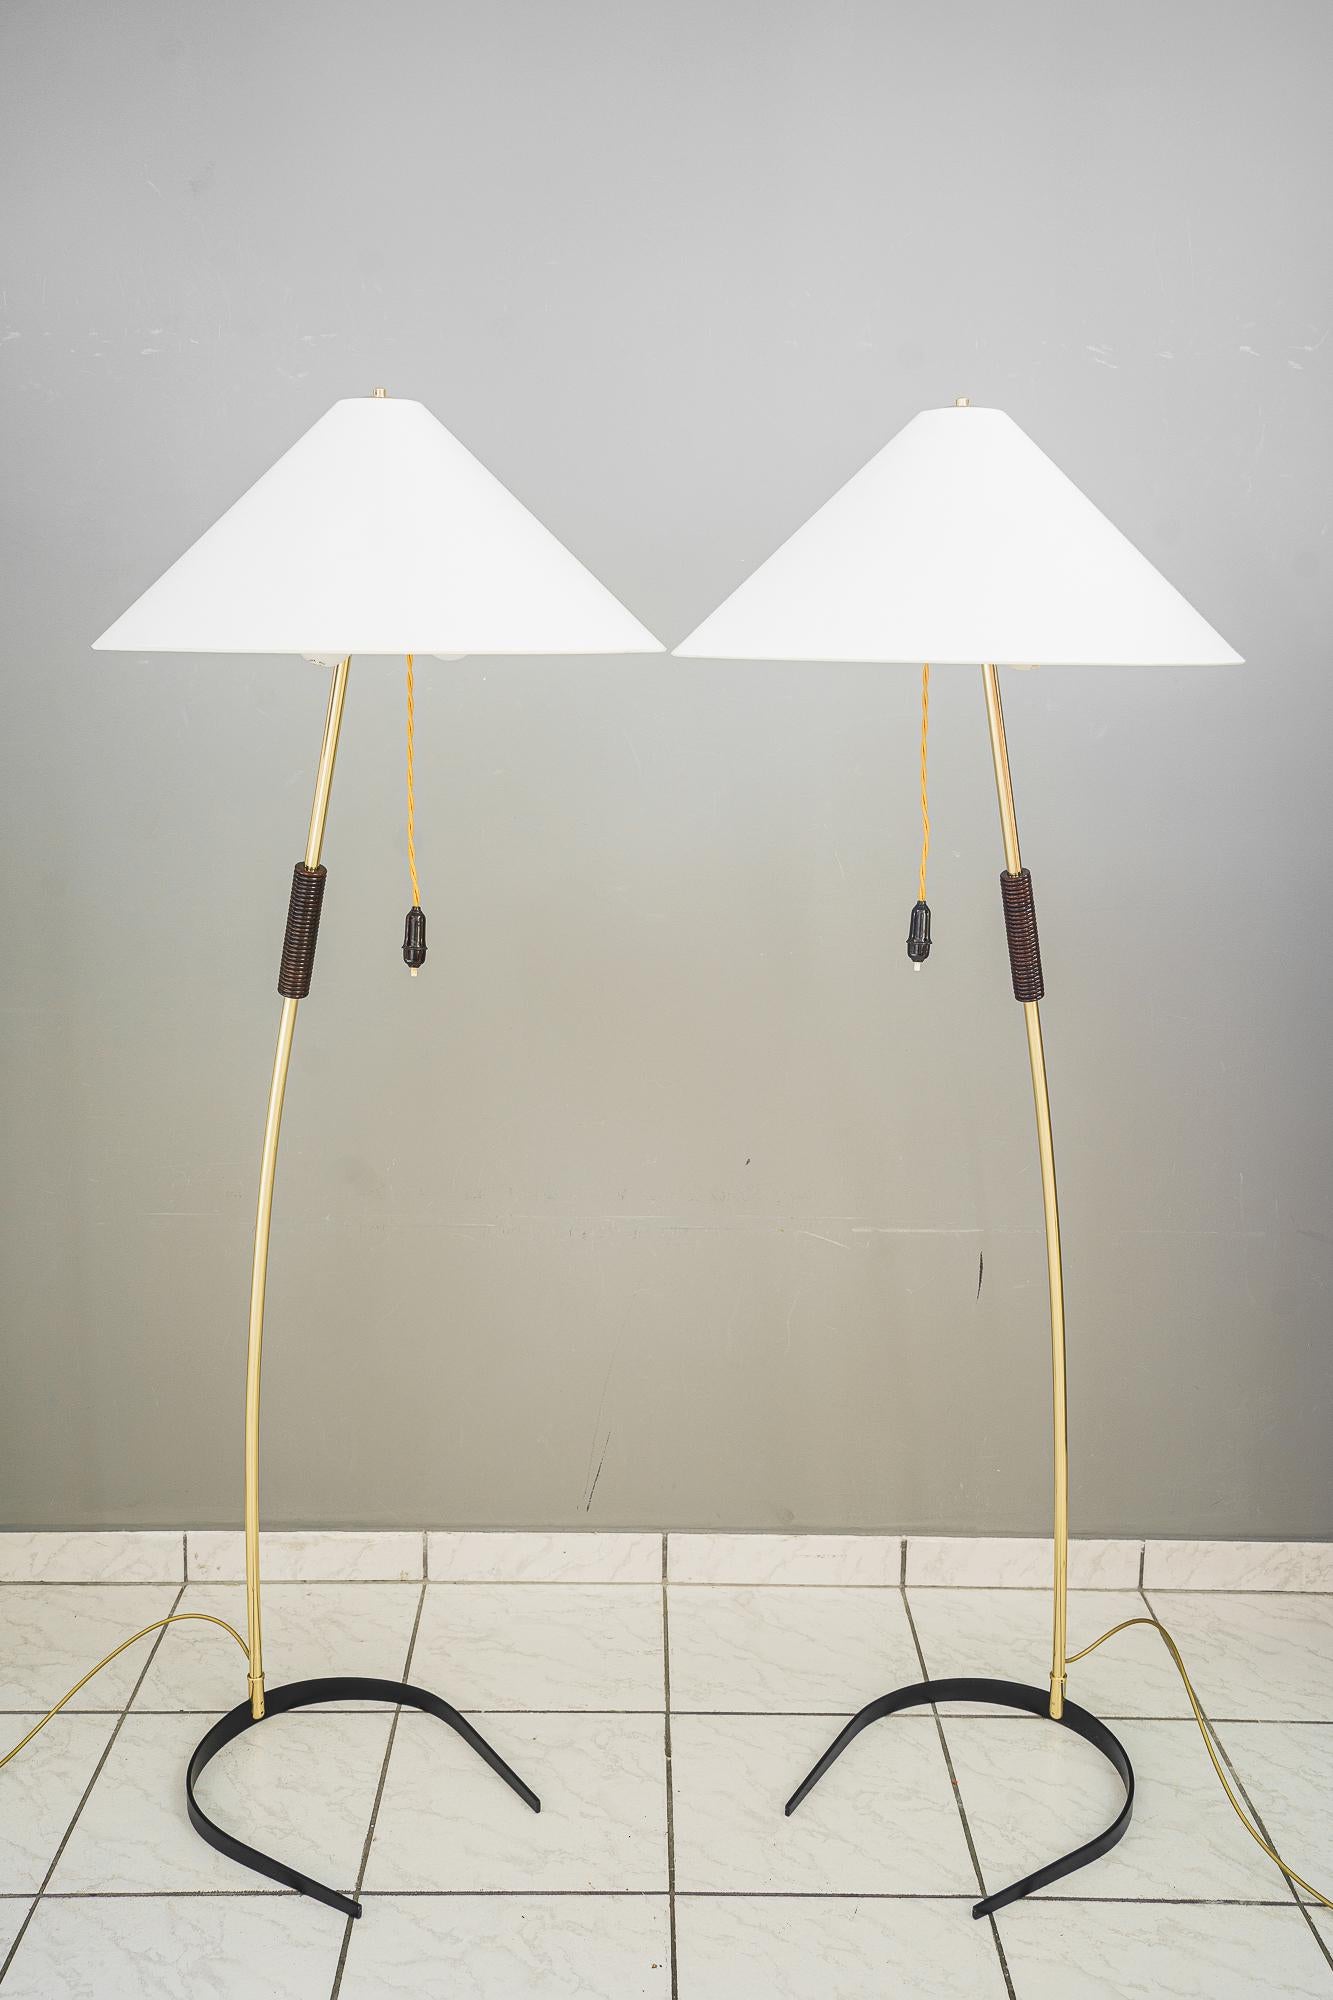 Polished 2x Rupert Nikoll Floor Lamps with Wood Handle, circa 1950s For Sale